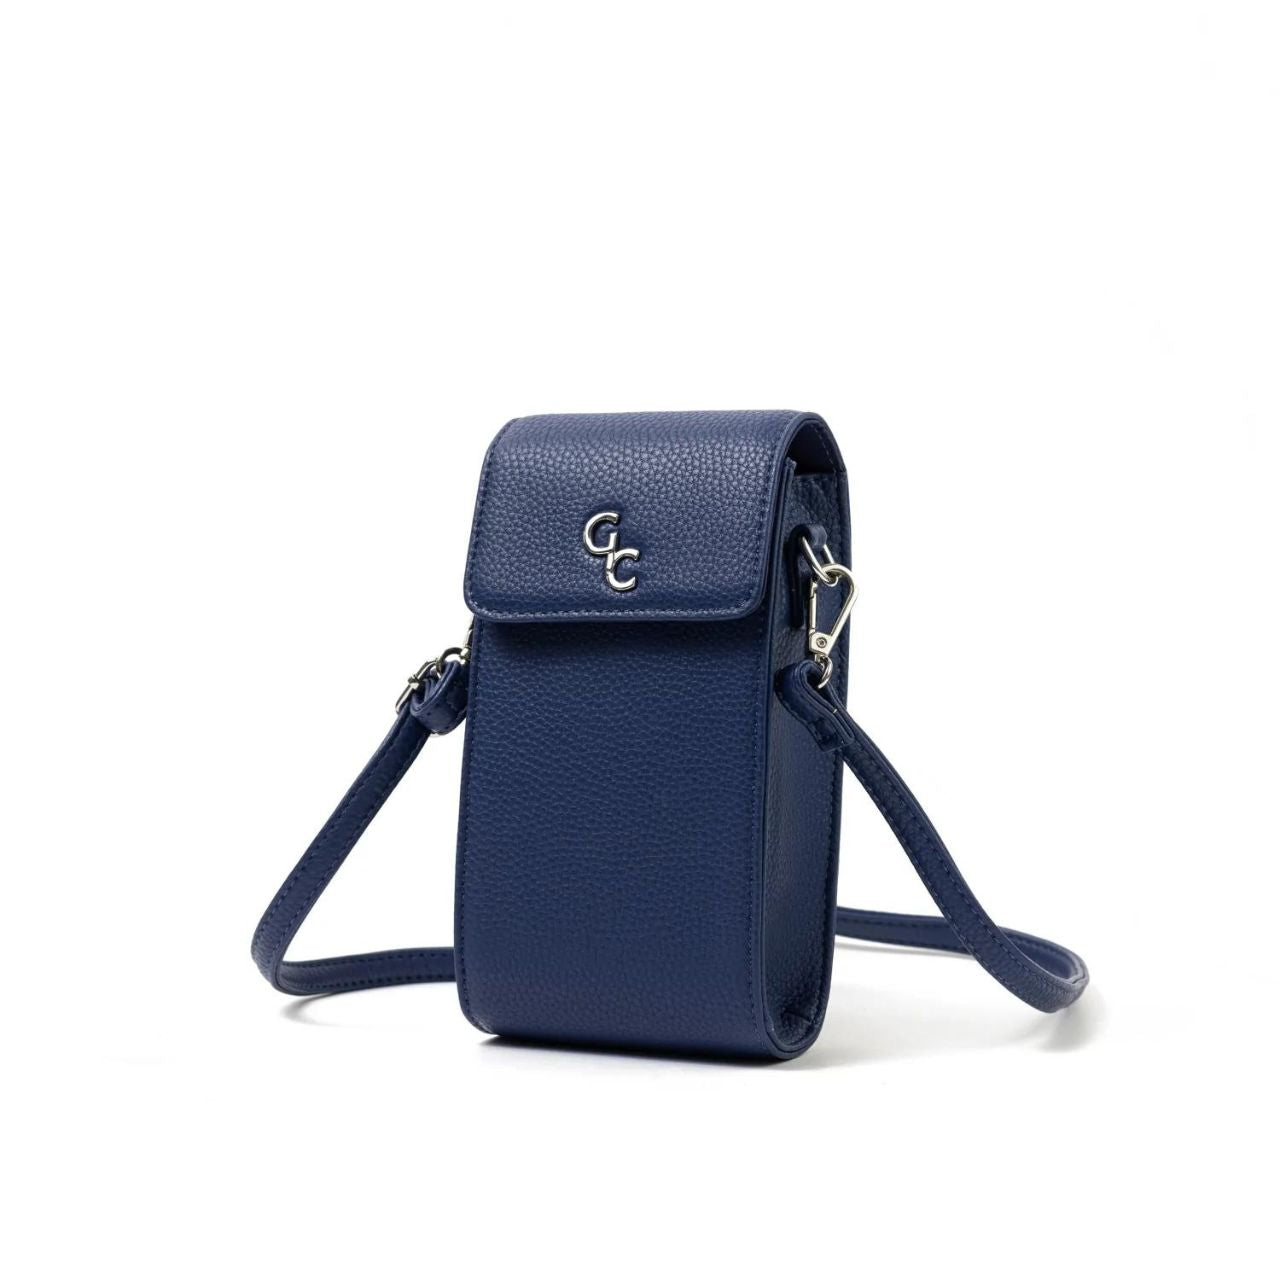 Mini Cross Bag - Navy by Galway Crystal  Introducing the new must have accessory that is truly functional. Our Light weight, Slim, Sleek, Crossbody bag is designed to hold the most essential accessory: Your mobile phone. There is nothing more liberating than carrying a lightweight bag that carries your essentials.